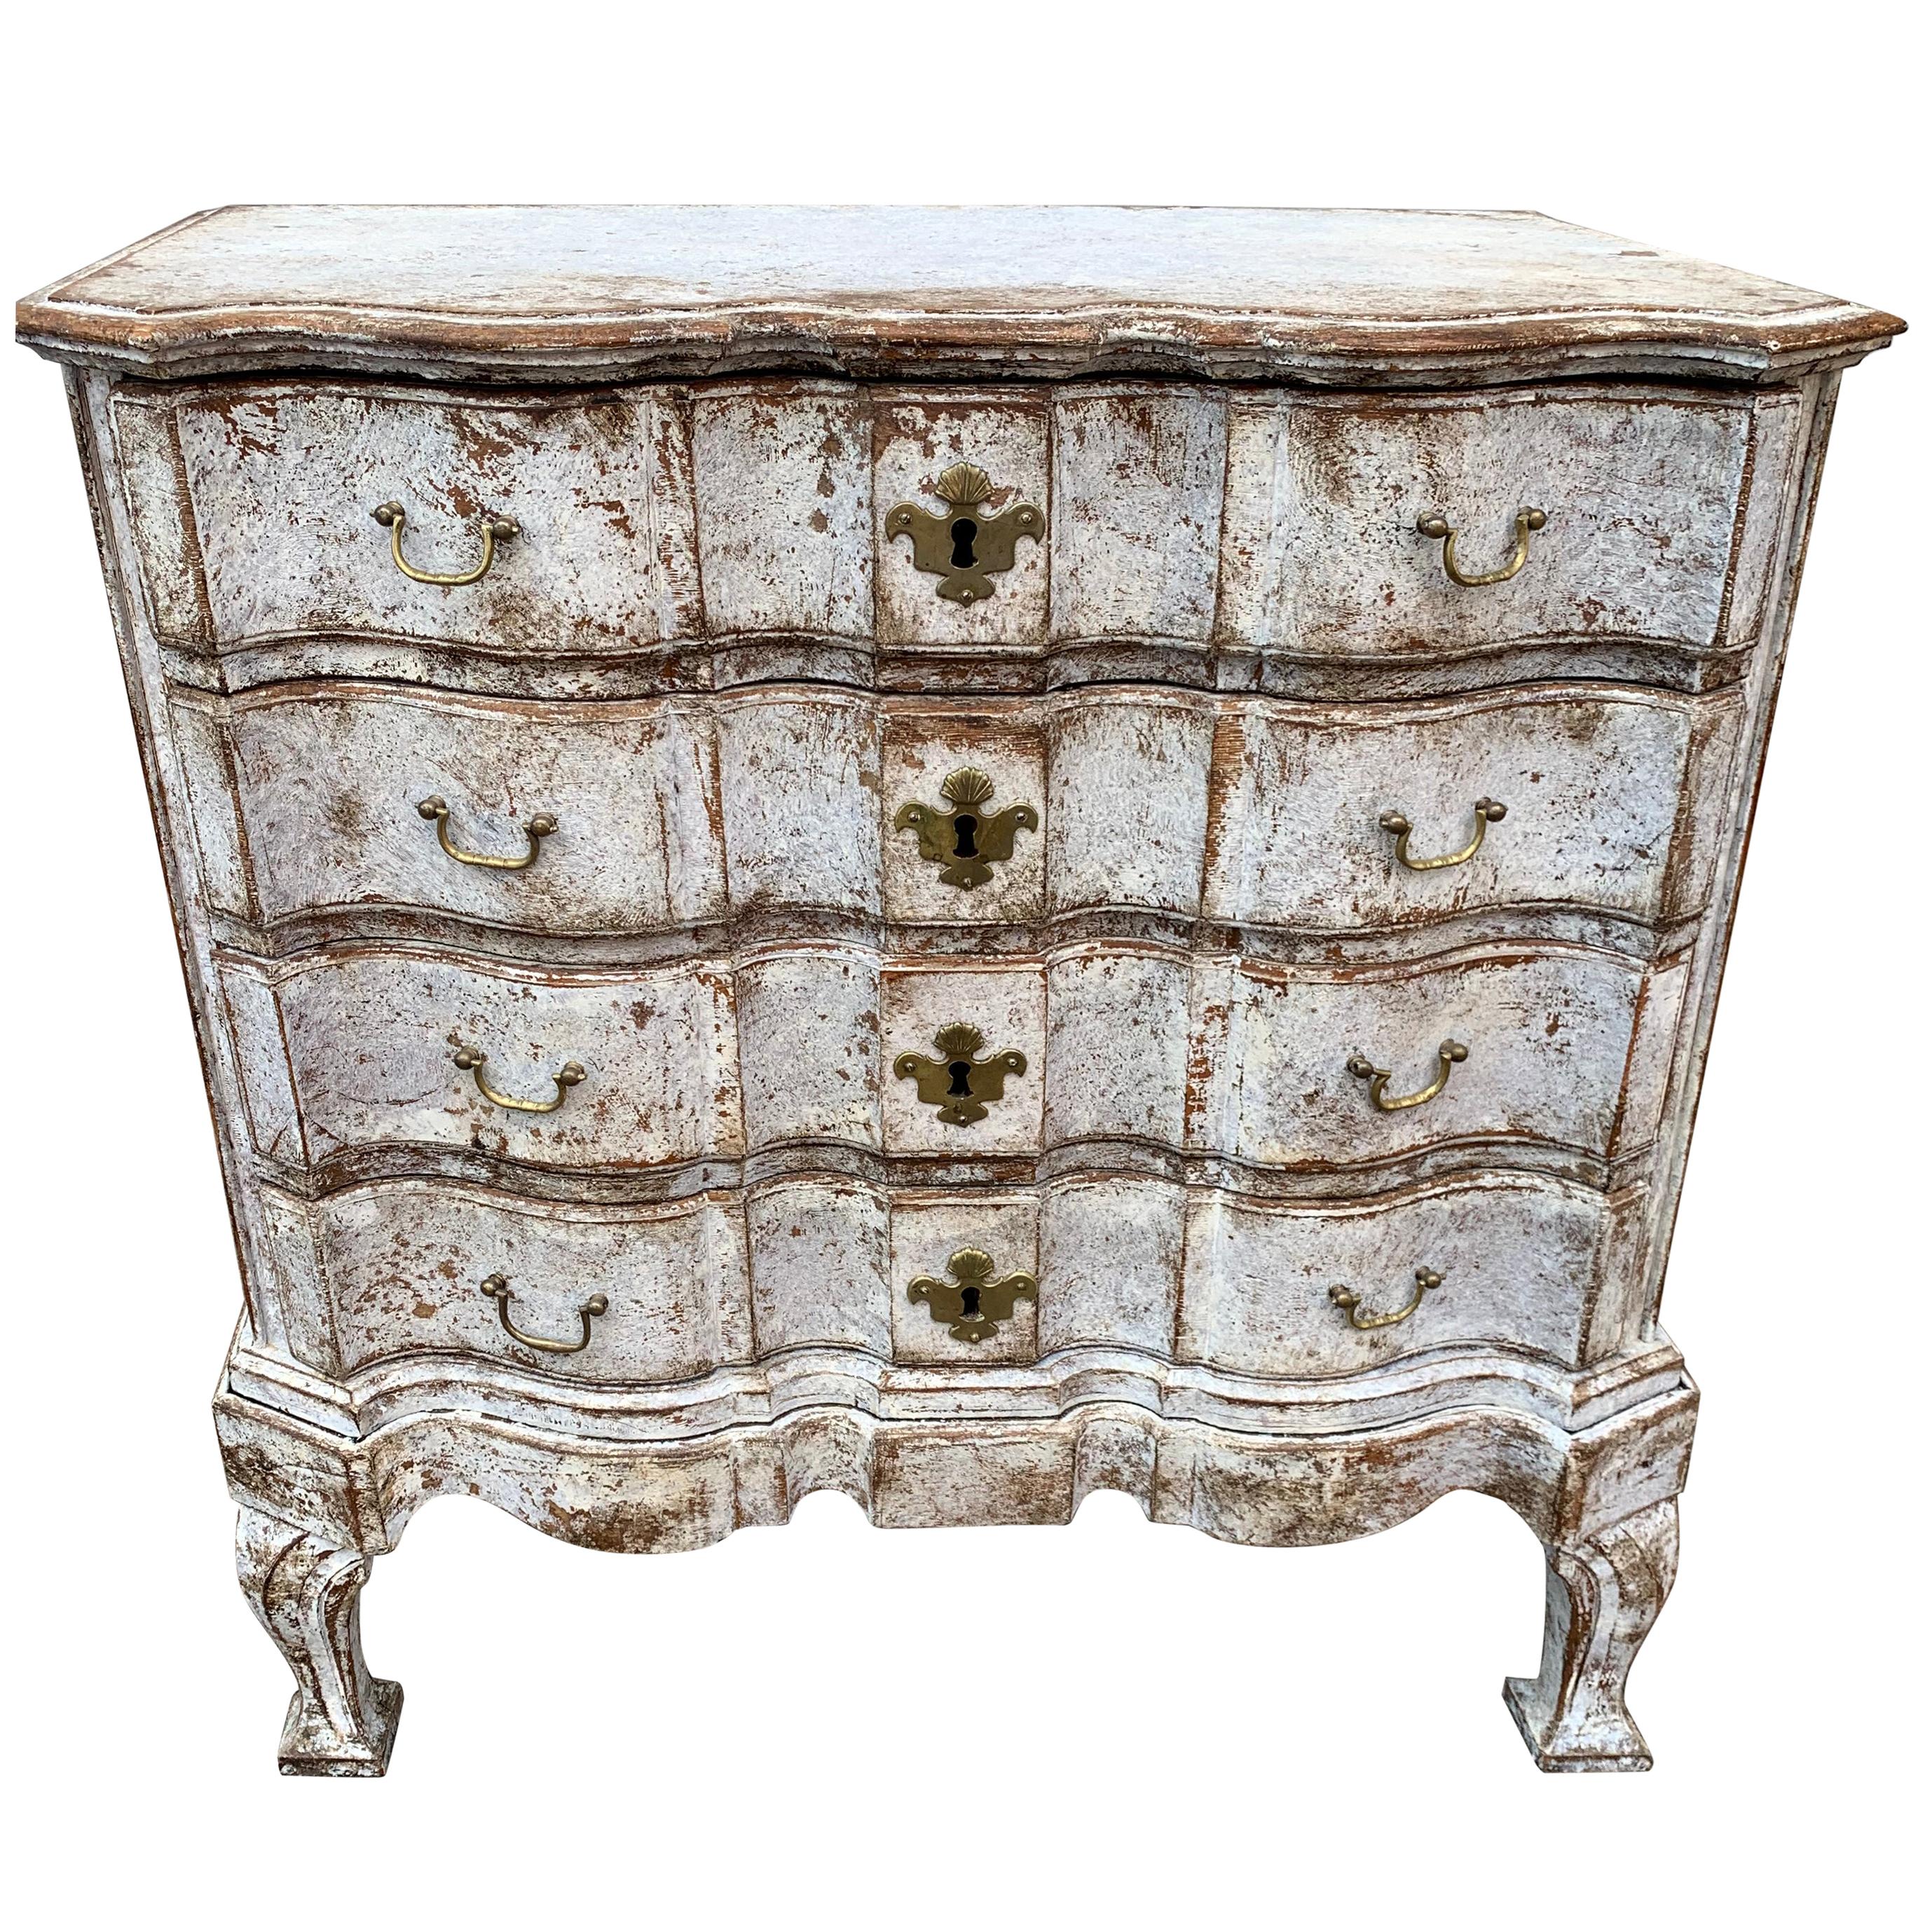 Danish 18th Century Painted Régence Chest of Drawers